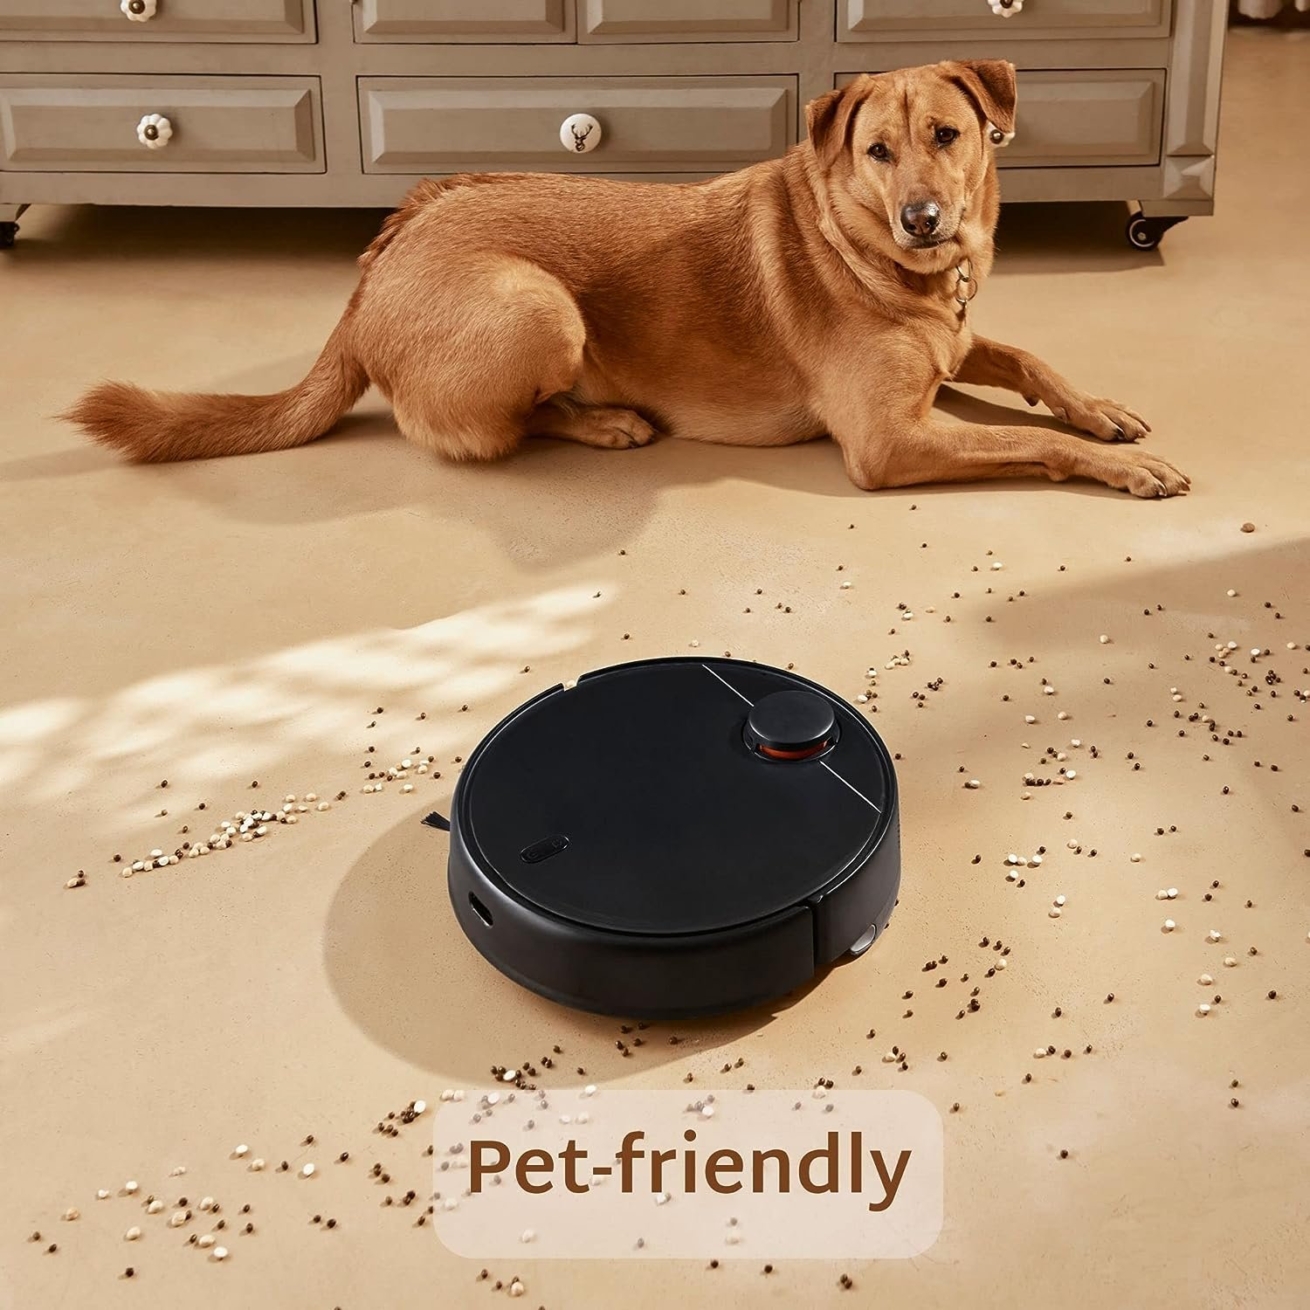 Mi Xiaomi Robot Vacuum Cleaner 2Pro, 5200 Mah, Best Suited for Premium 3 & 4  BHKs, Professional Mopping 2.0, Highest Runtime of 4.5 Hrs.,Strong Suction, Next  Gen Laser Navigation, Alexa/GA Enabled - Dealcliq